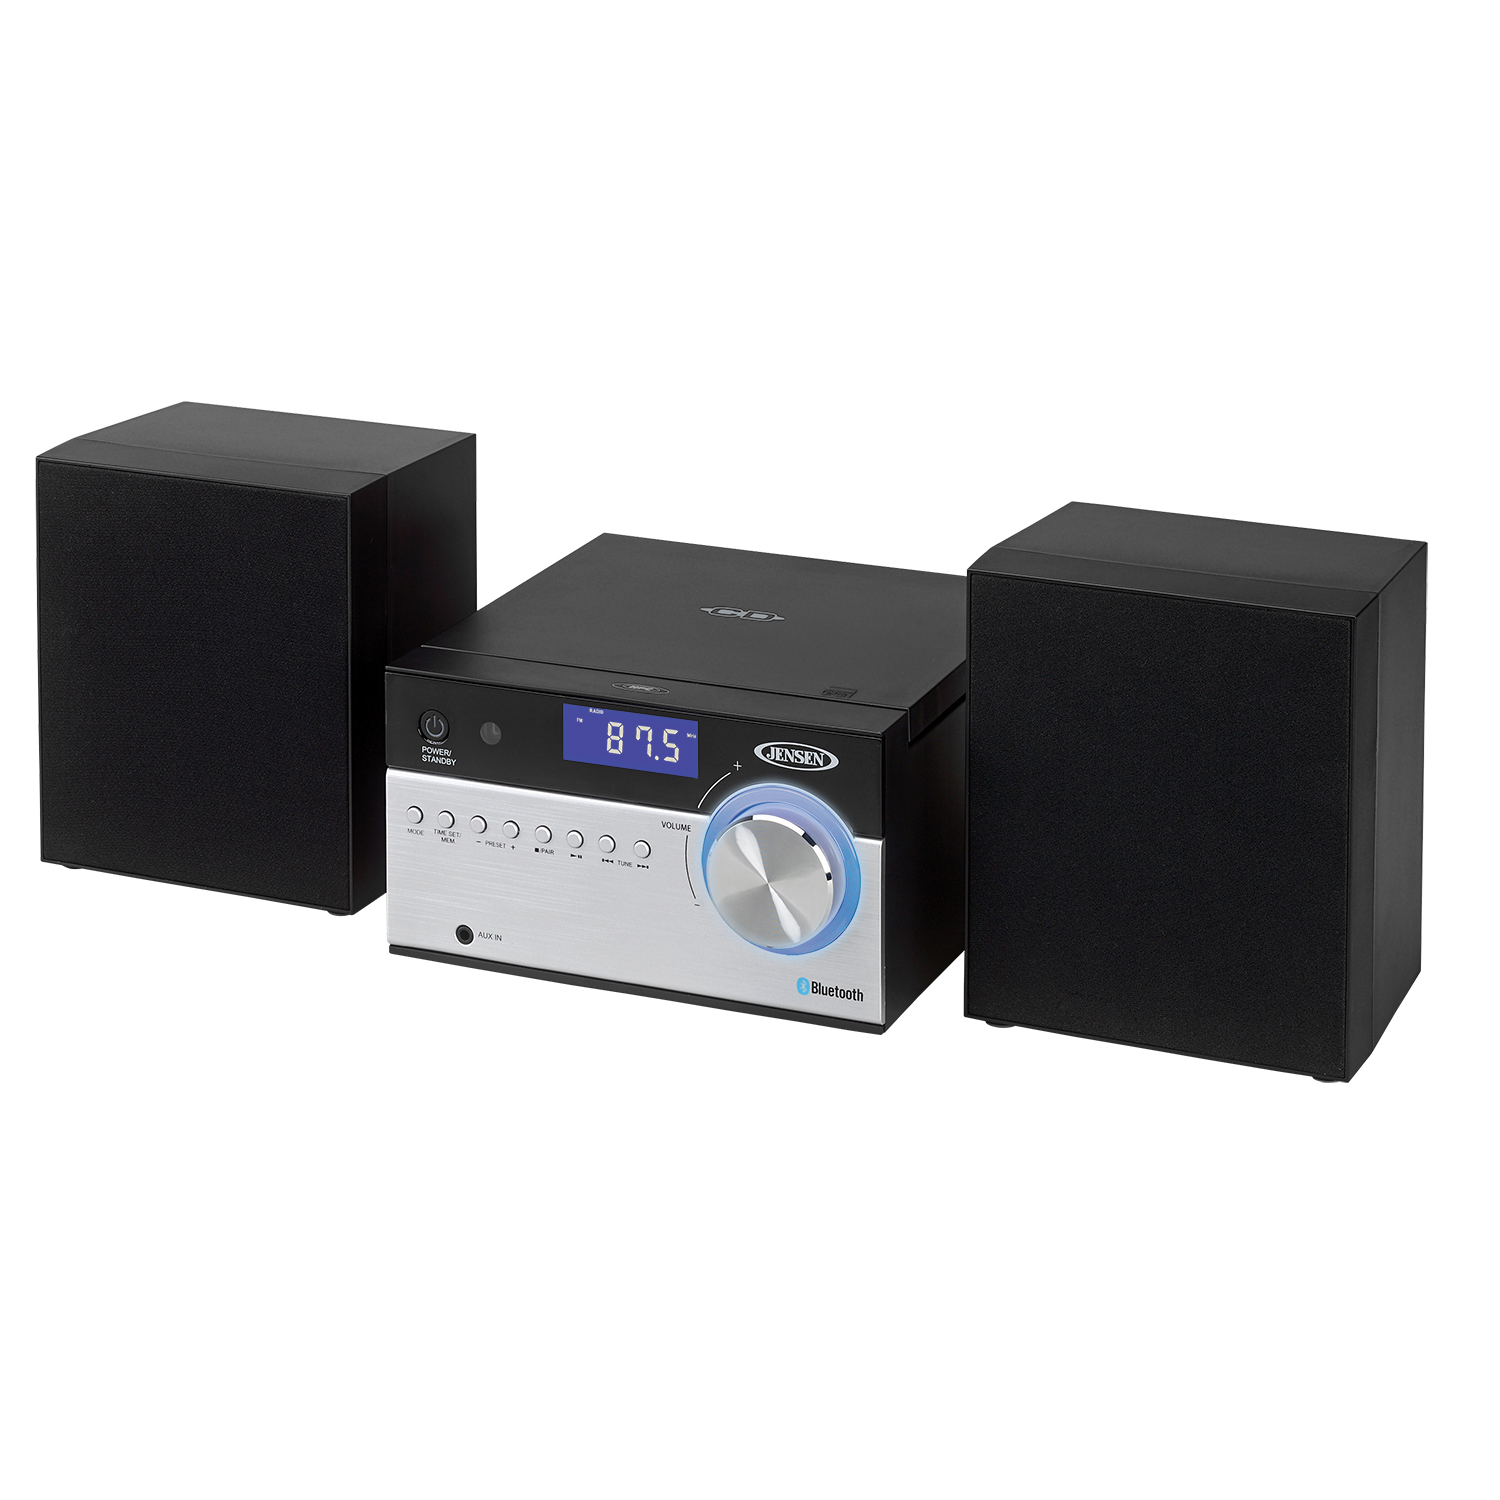 Jensen Bluetooth CD Music System with Digital AM/FM Stereo Receiver - JBS-200 - image 1 of 4